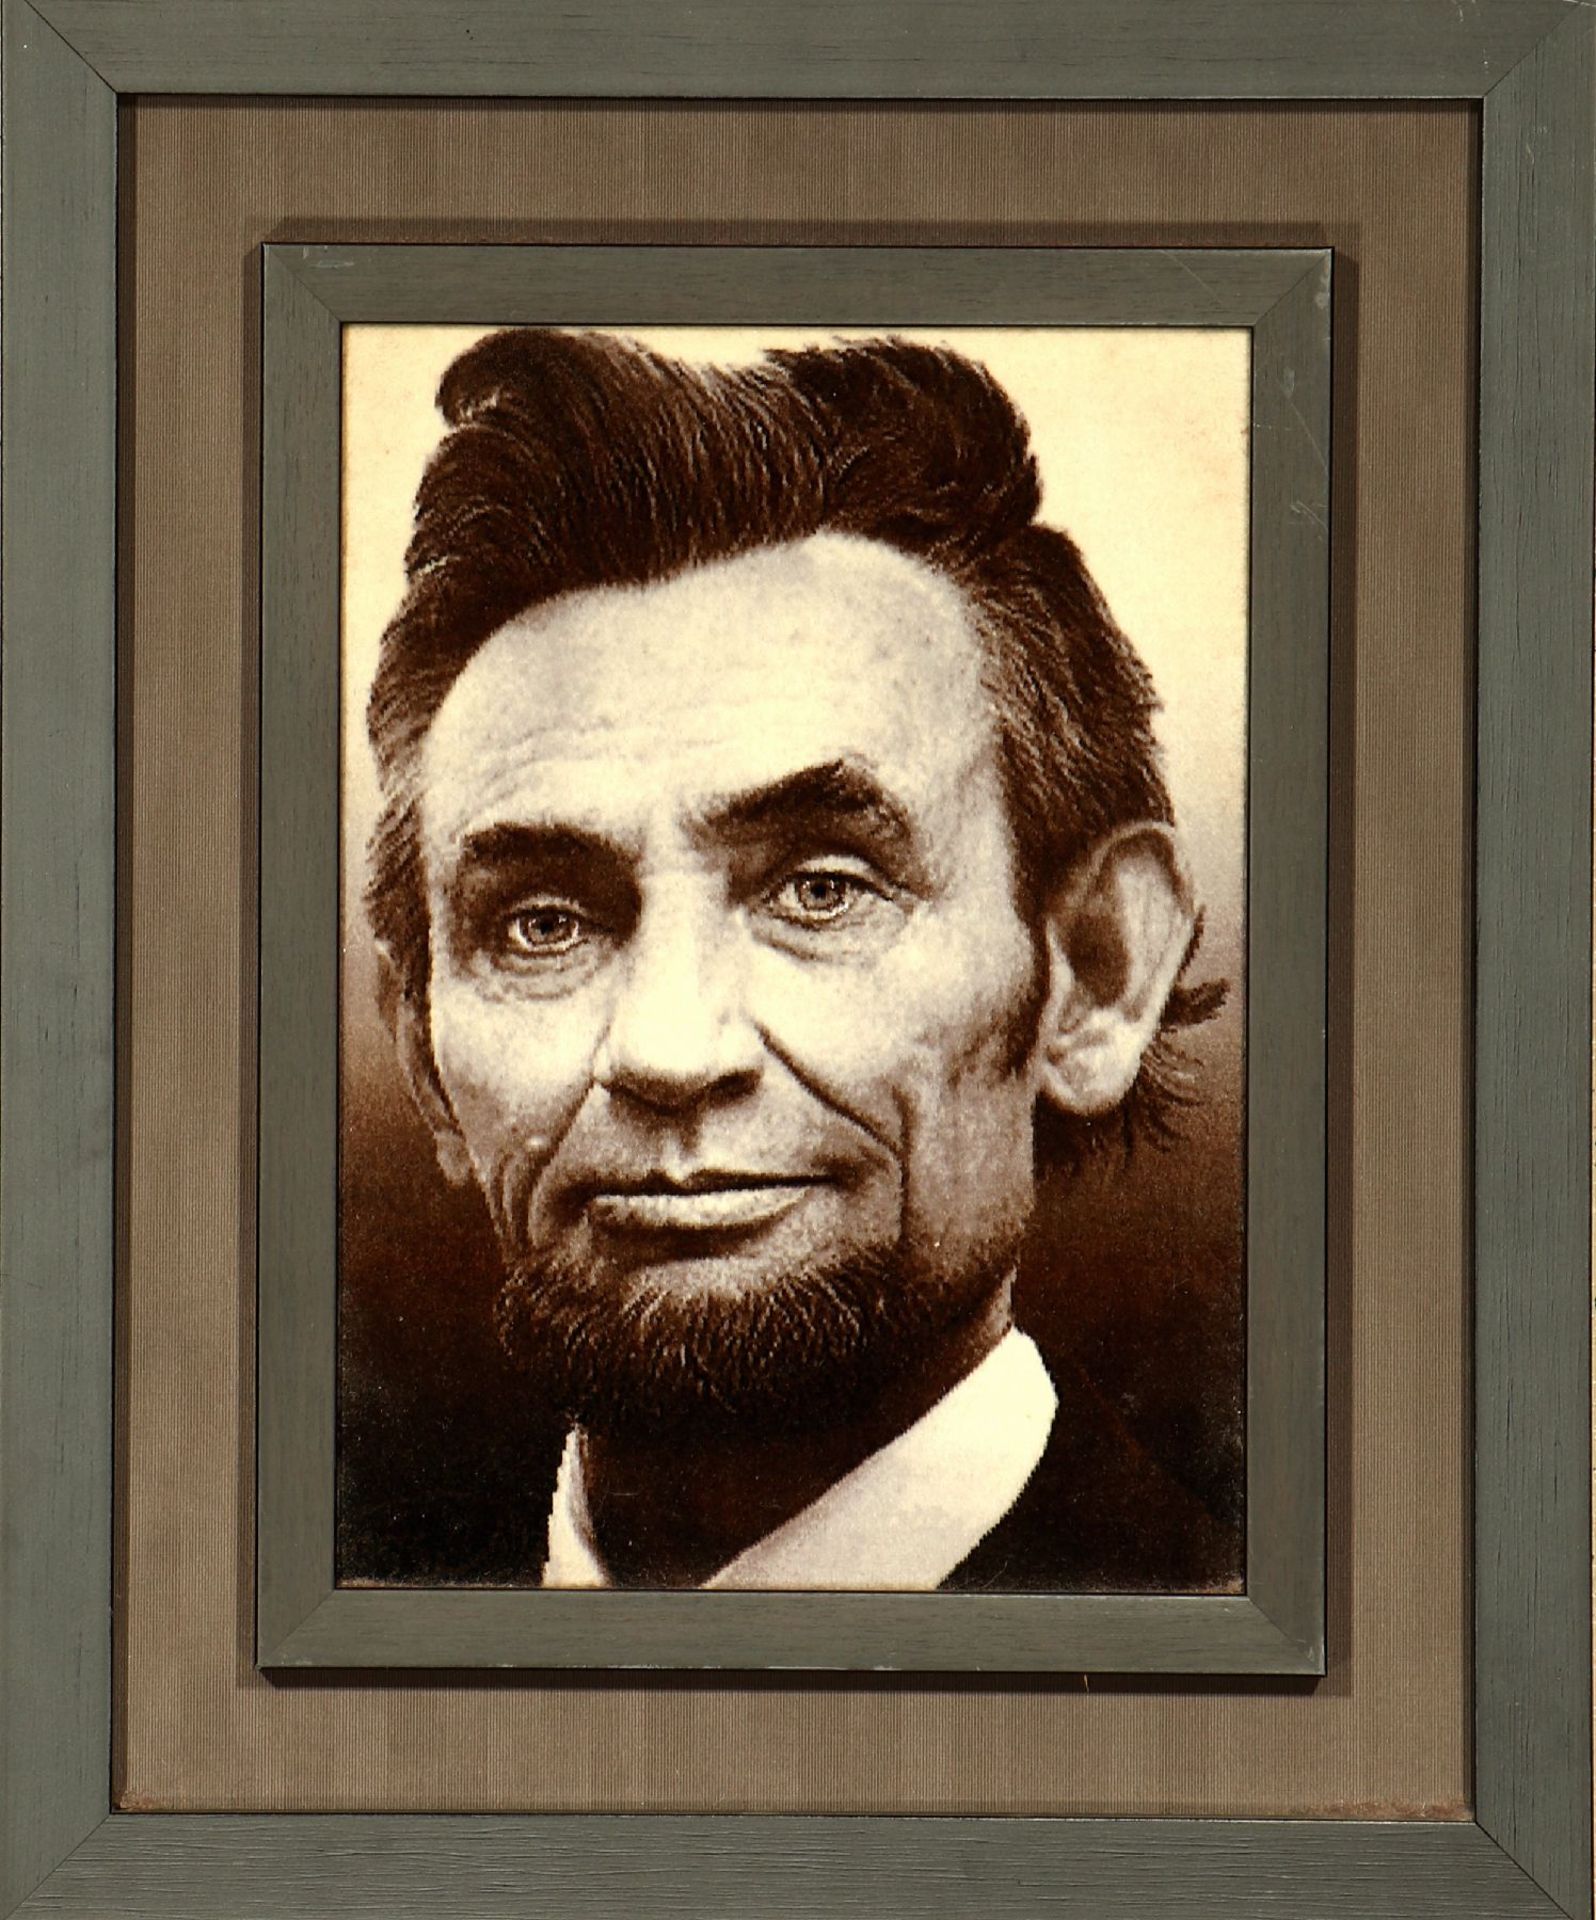 Tabriz fine (Abraham Lincoln), Persia, approx.10 years old, wool on silk, approx. 48 x 3 5 cm,